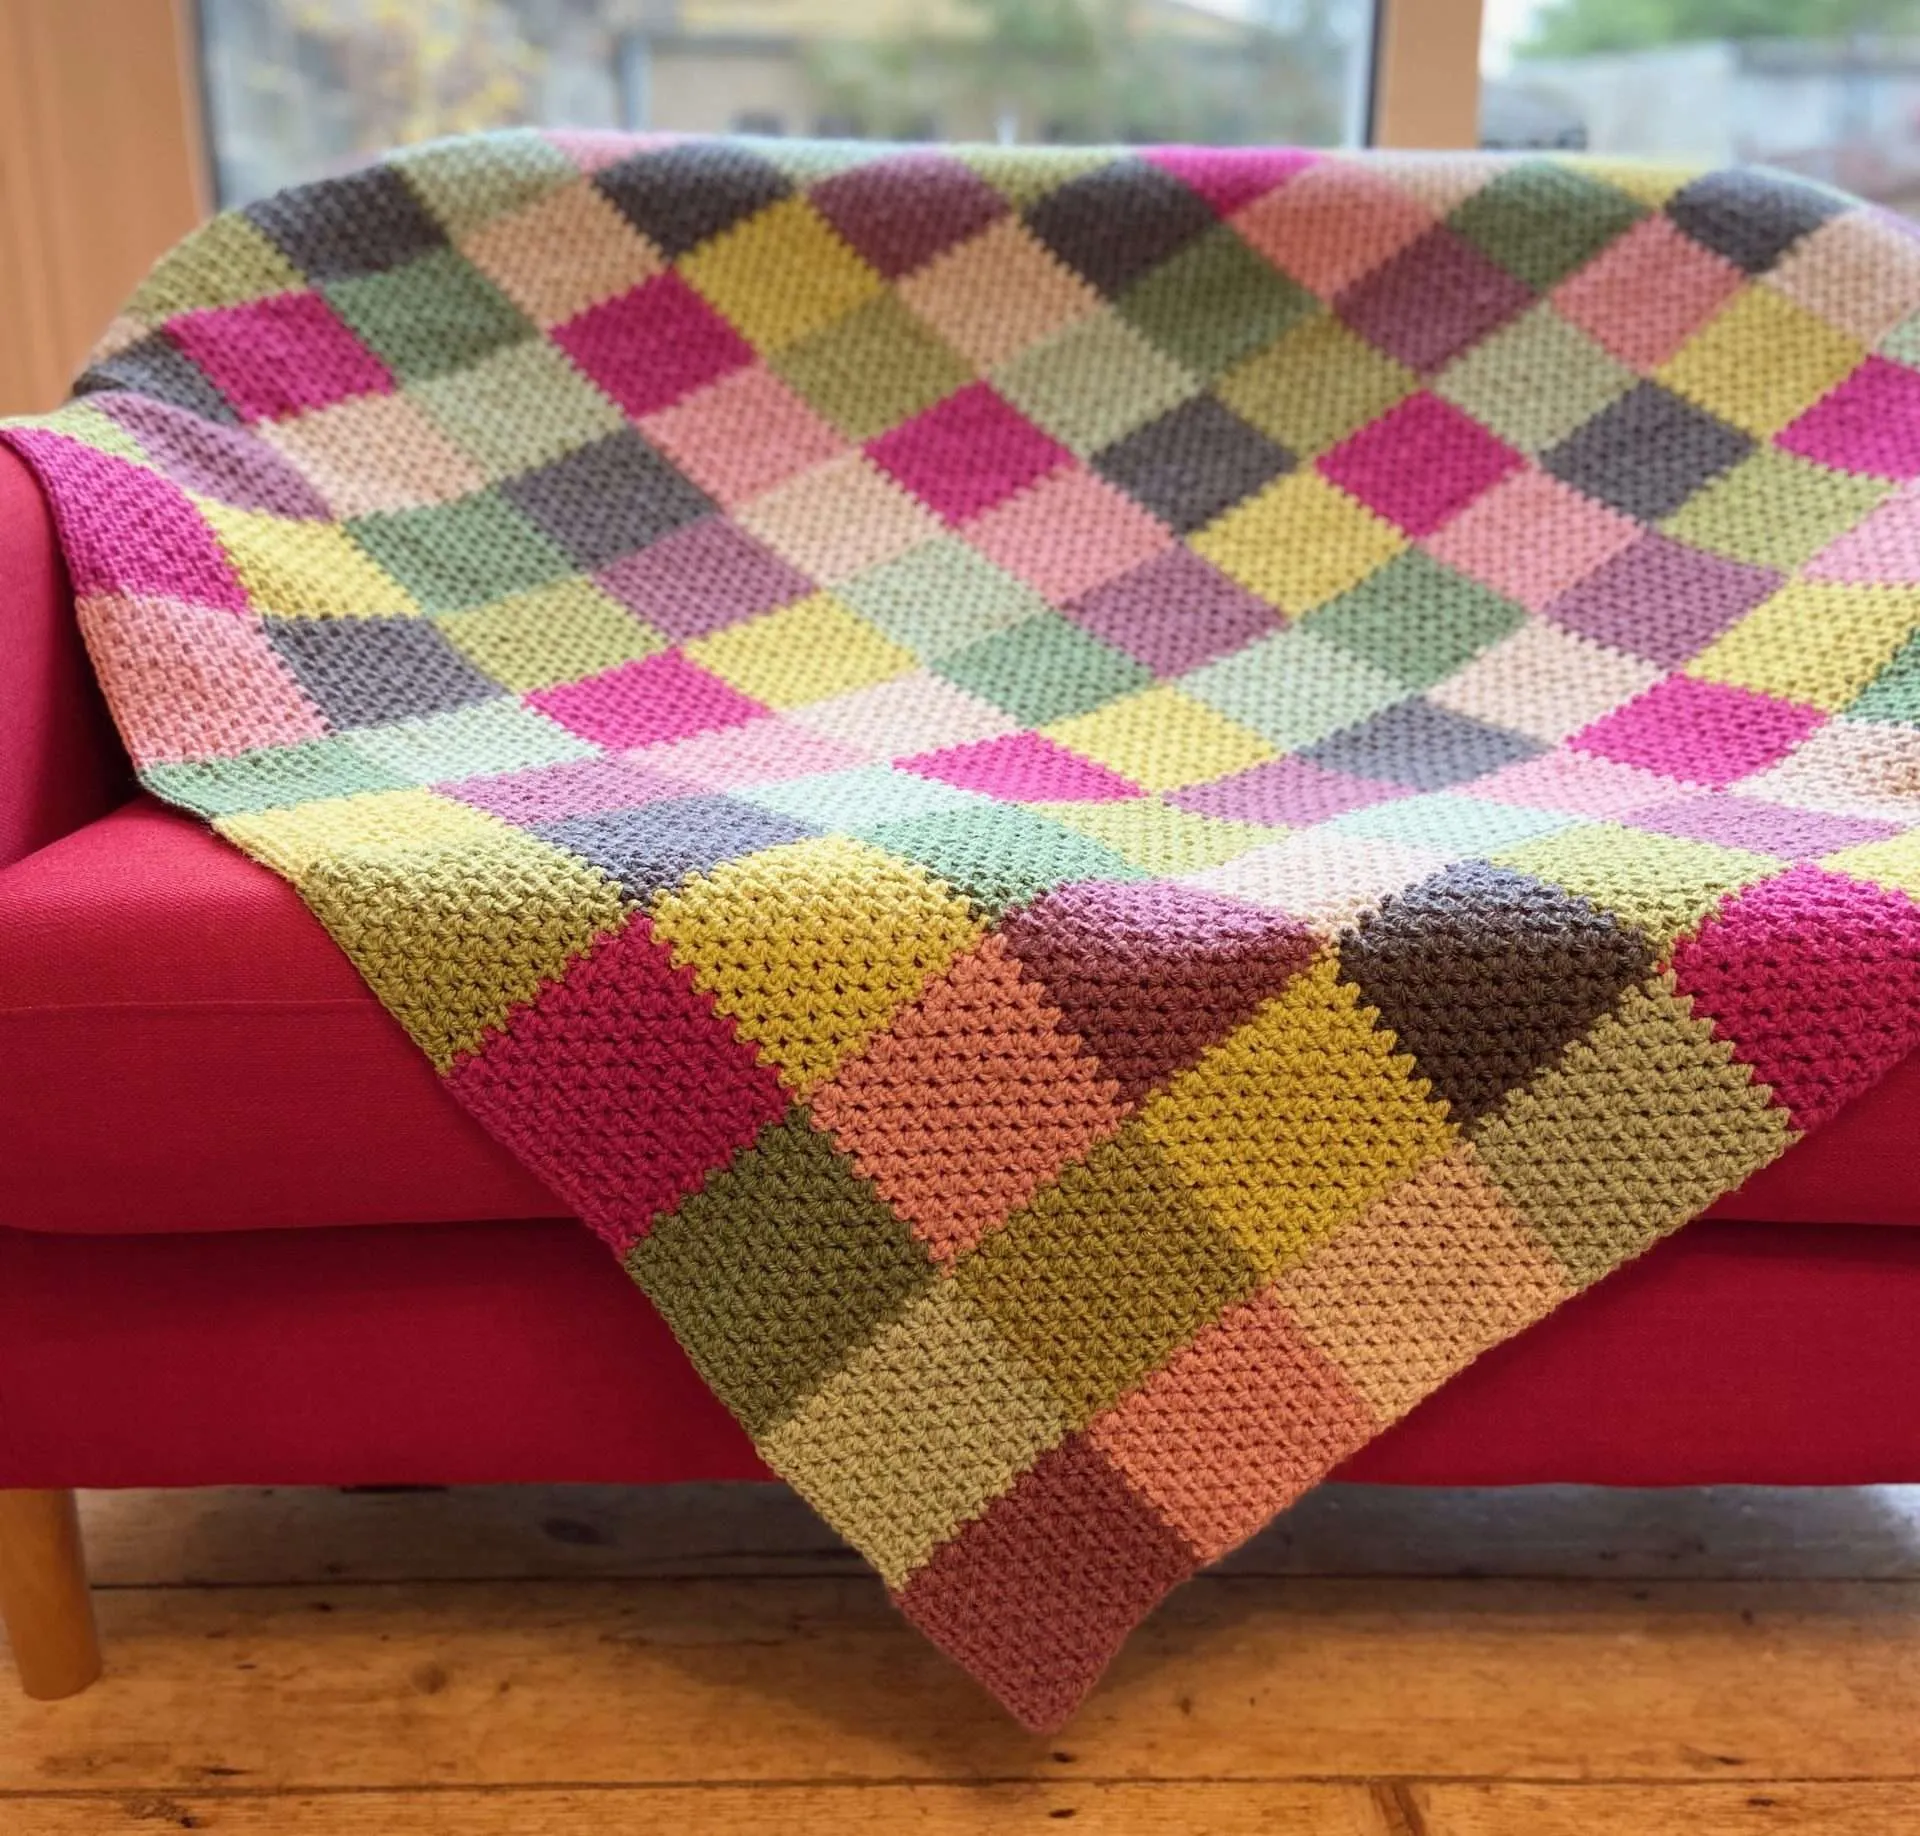 rainforest patchwork blanket draped over a couch
